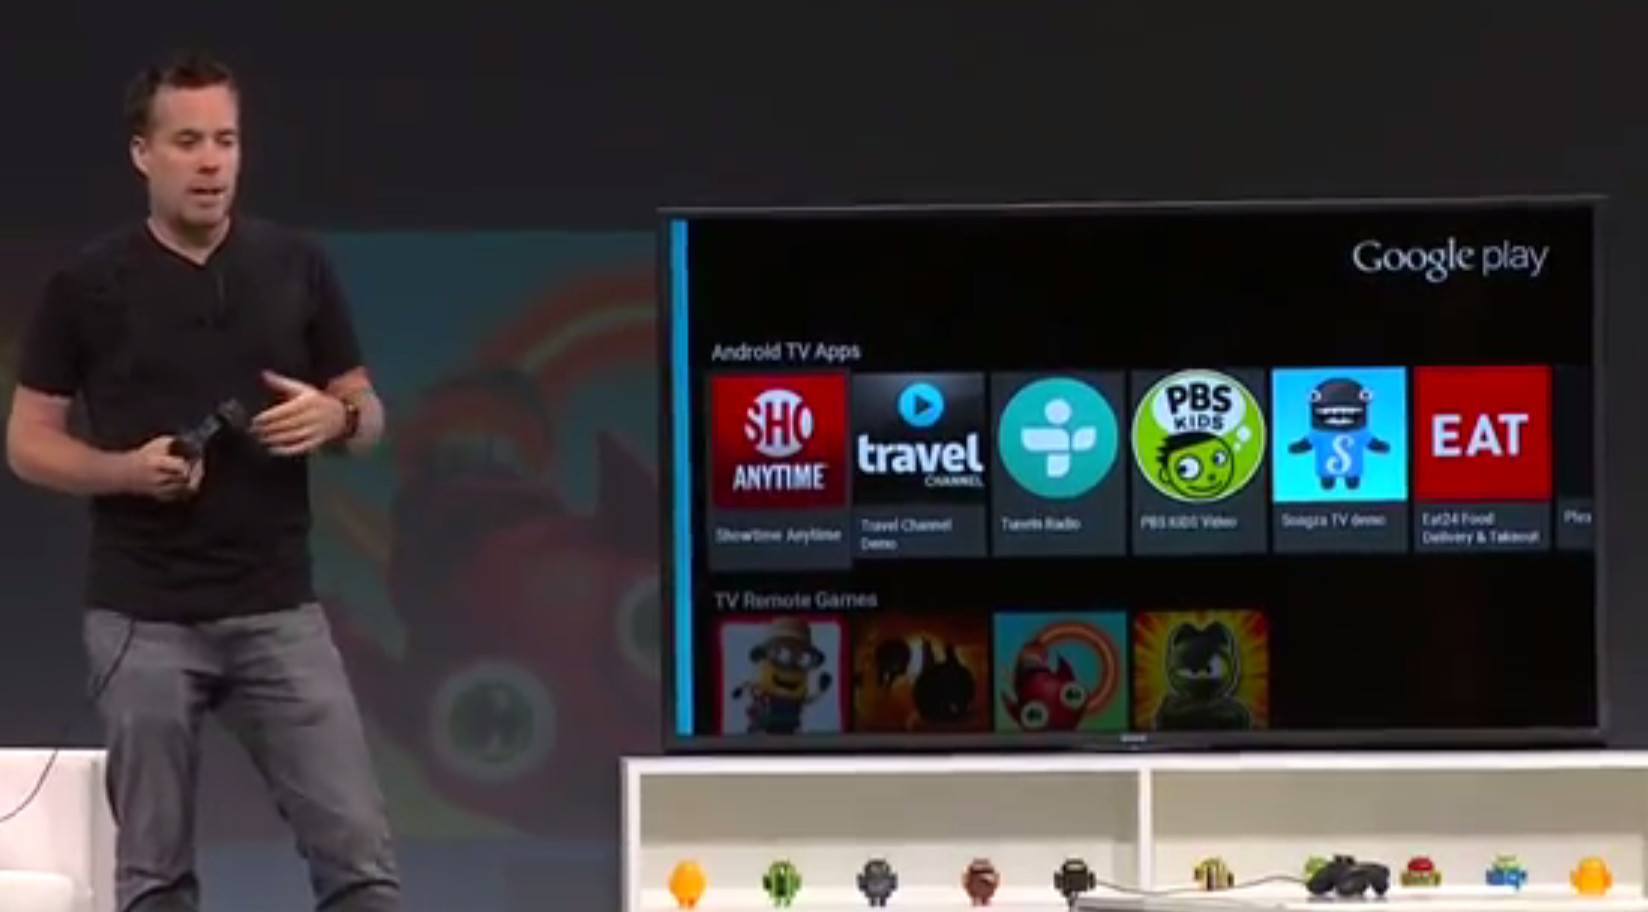 Android TV - TV Remote Games